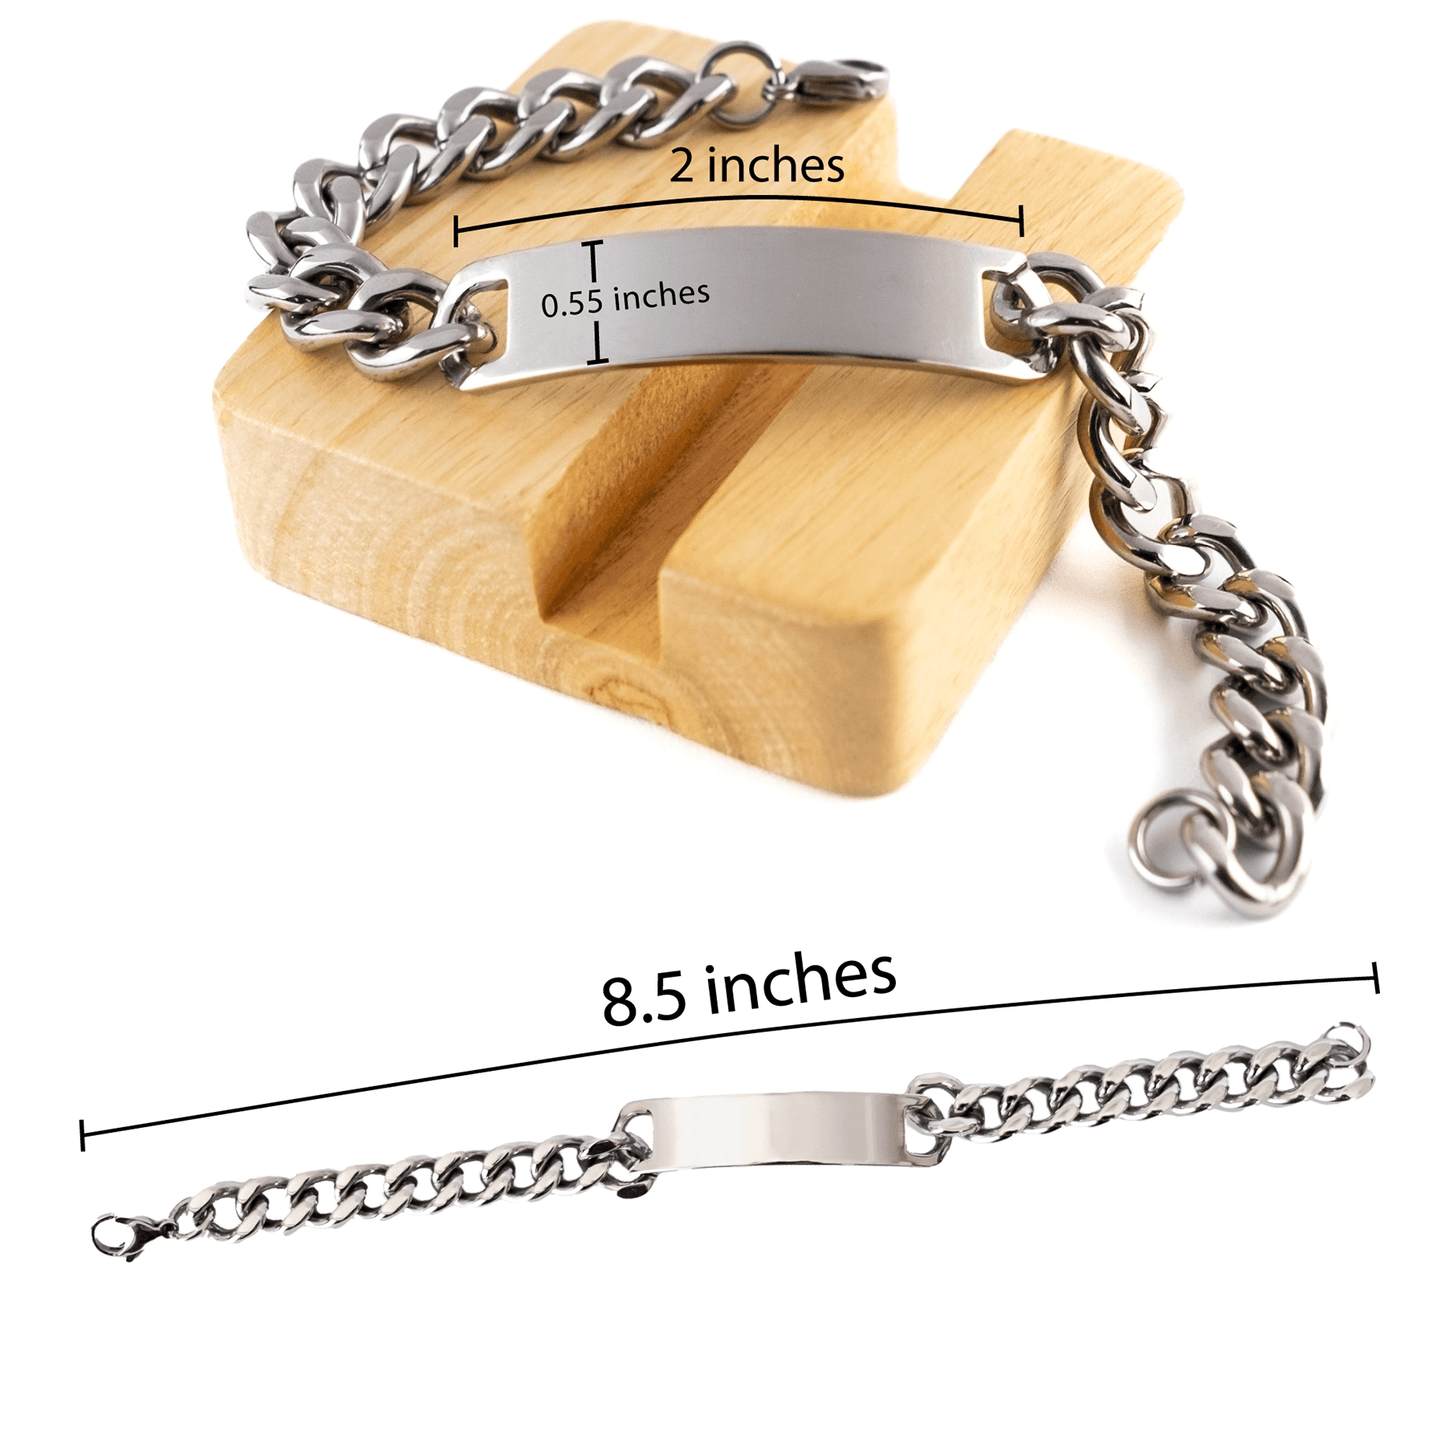 Sarcastic Mechanical Engineer Cuban Chain Stainless Steel Bracelet Gifts, Christmas Holiday Gifts for Mechanical Engineer Birthday, Mechanical Engineer: Because greatness is woven into the fabric of every day, Coworkers, Friends - Mallard Moon Gift Shop